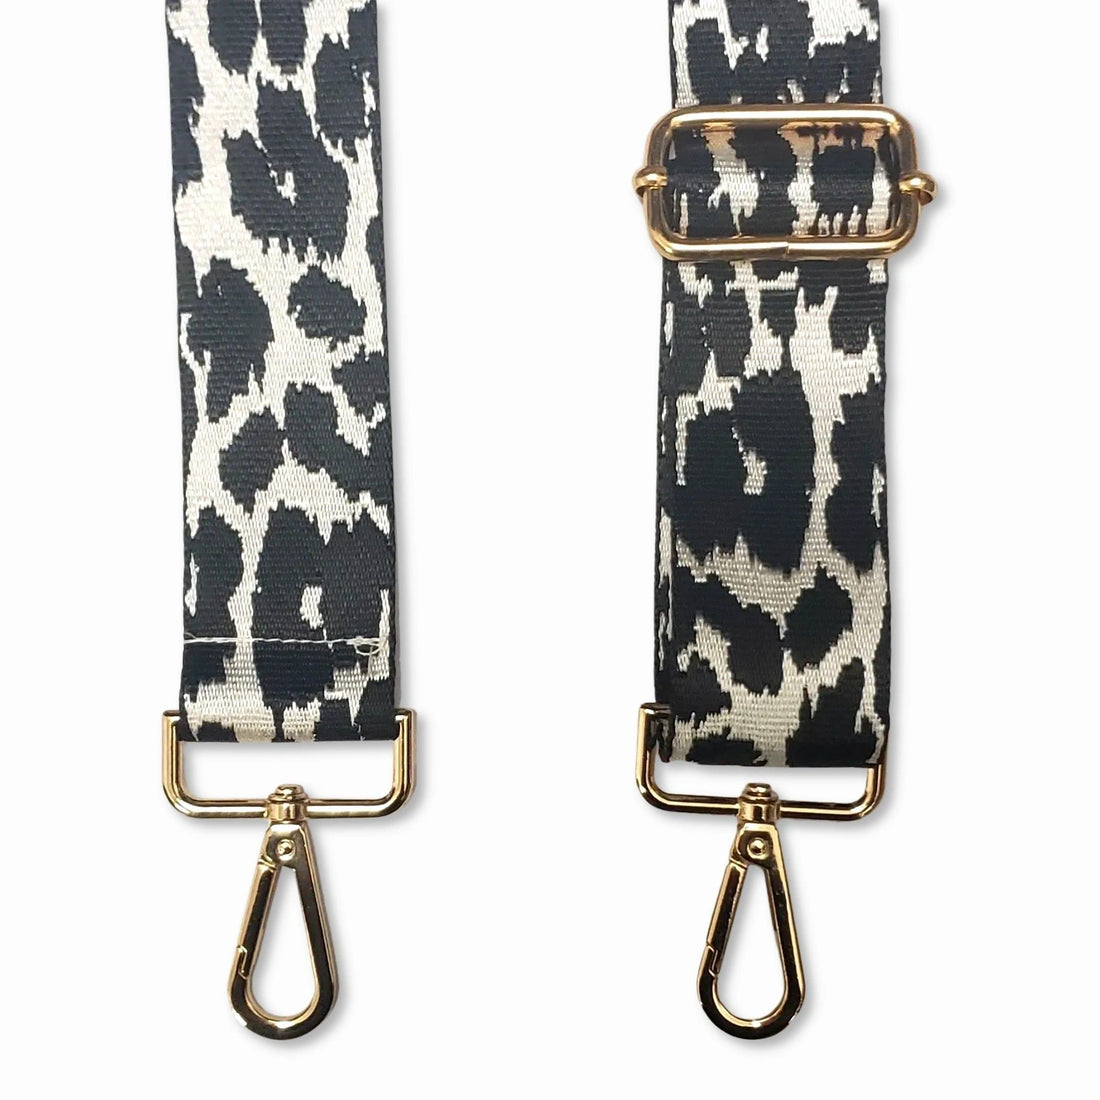 Adjustable leopard Print Strap with Golden Carabiners